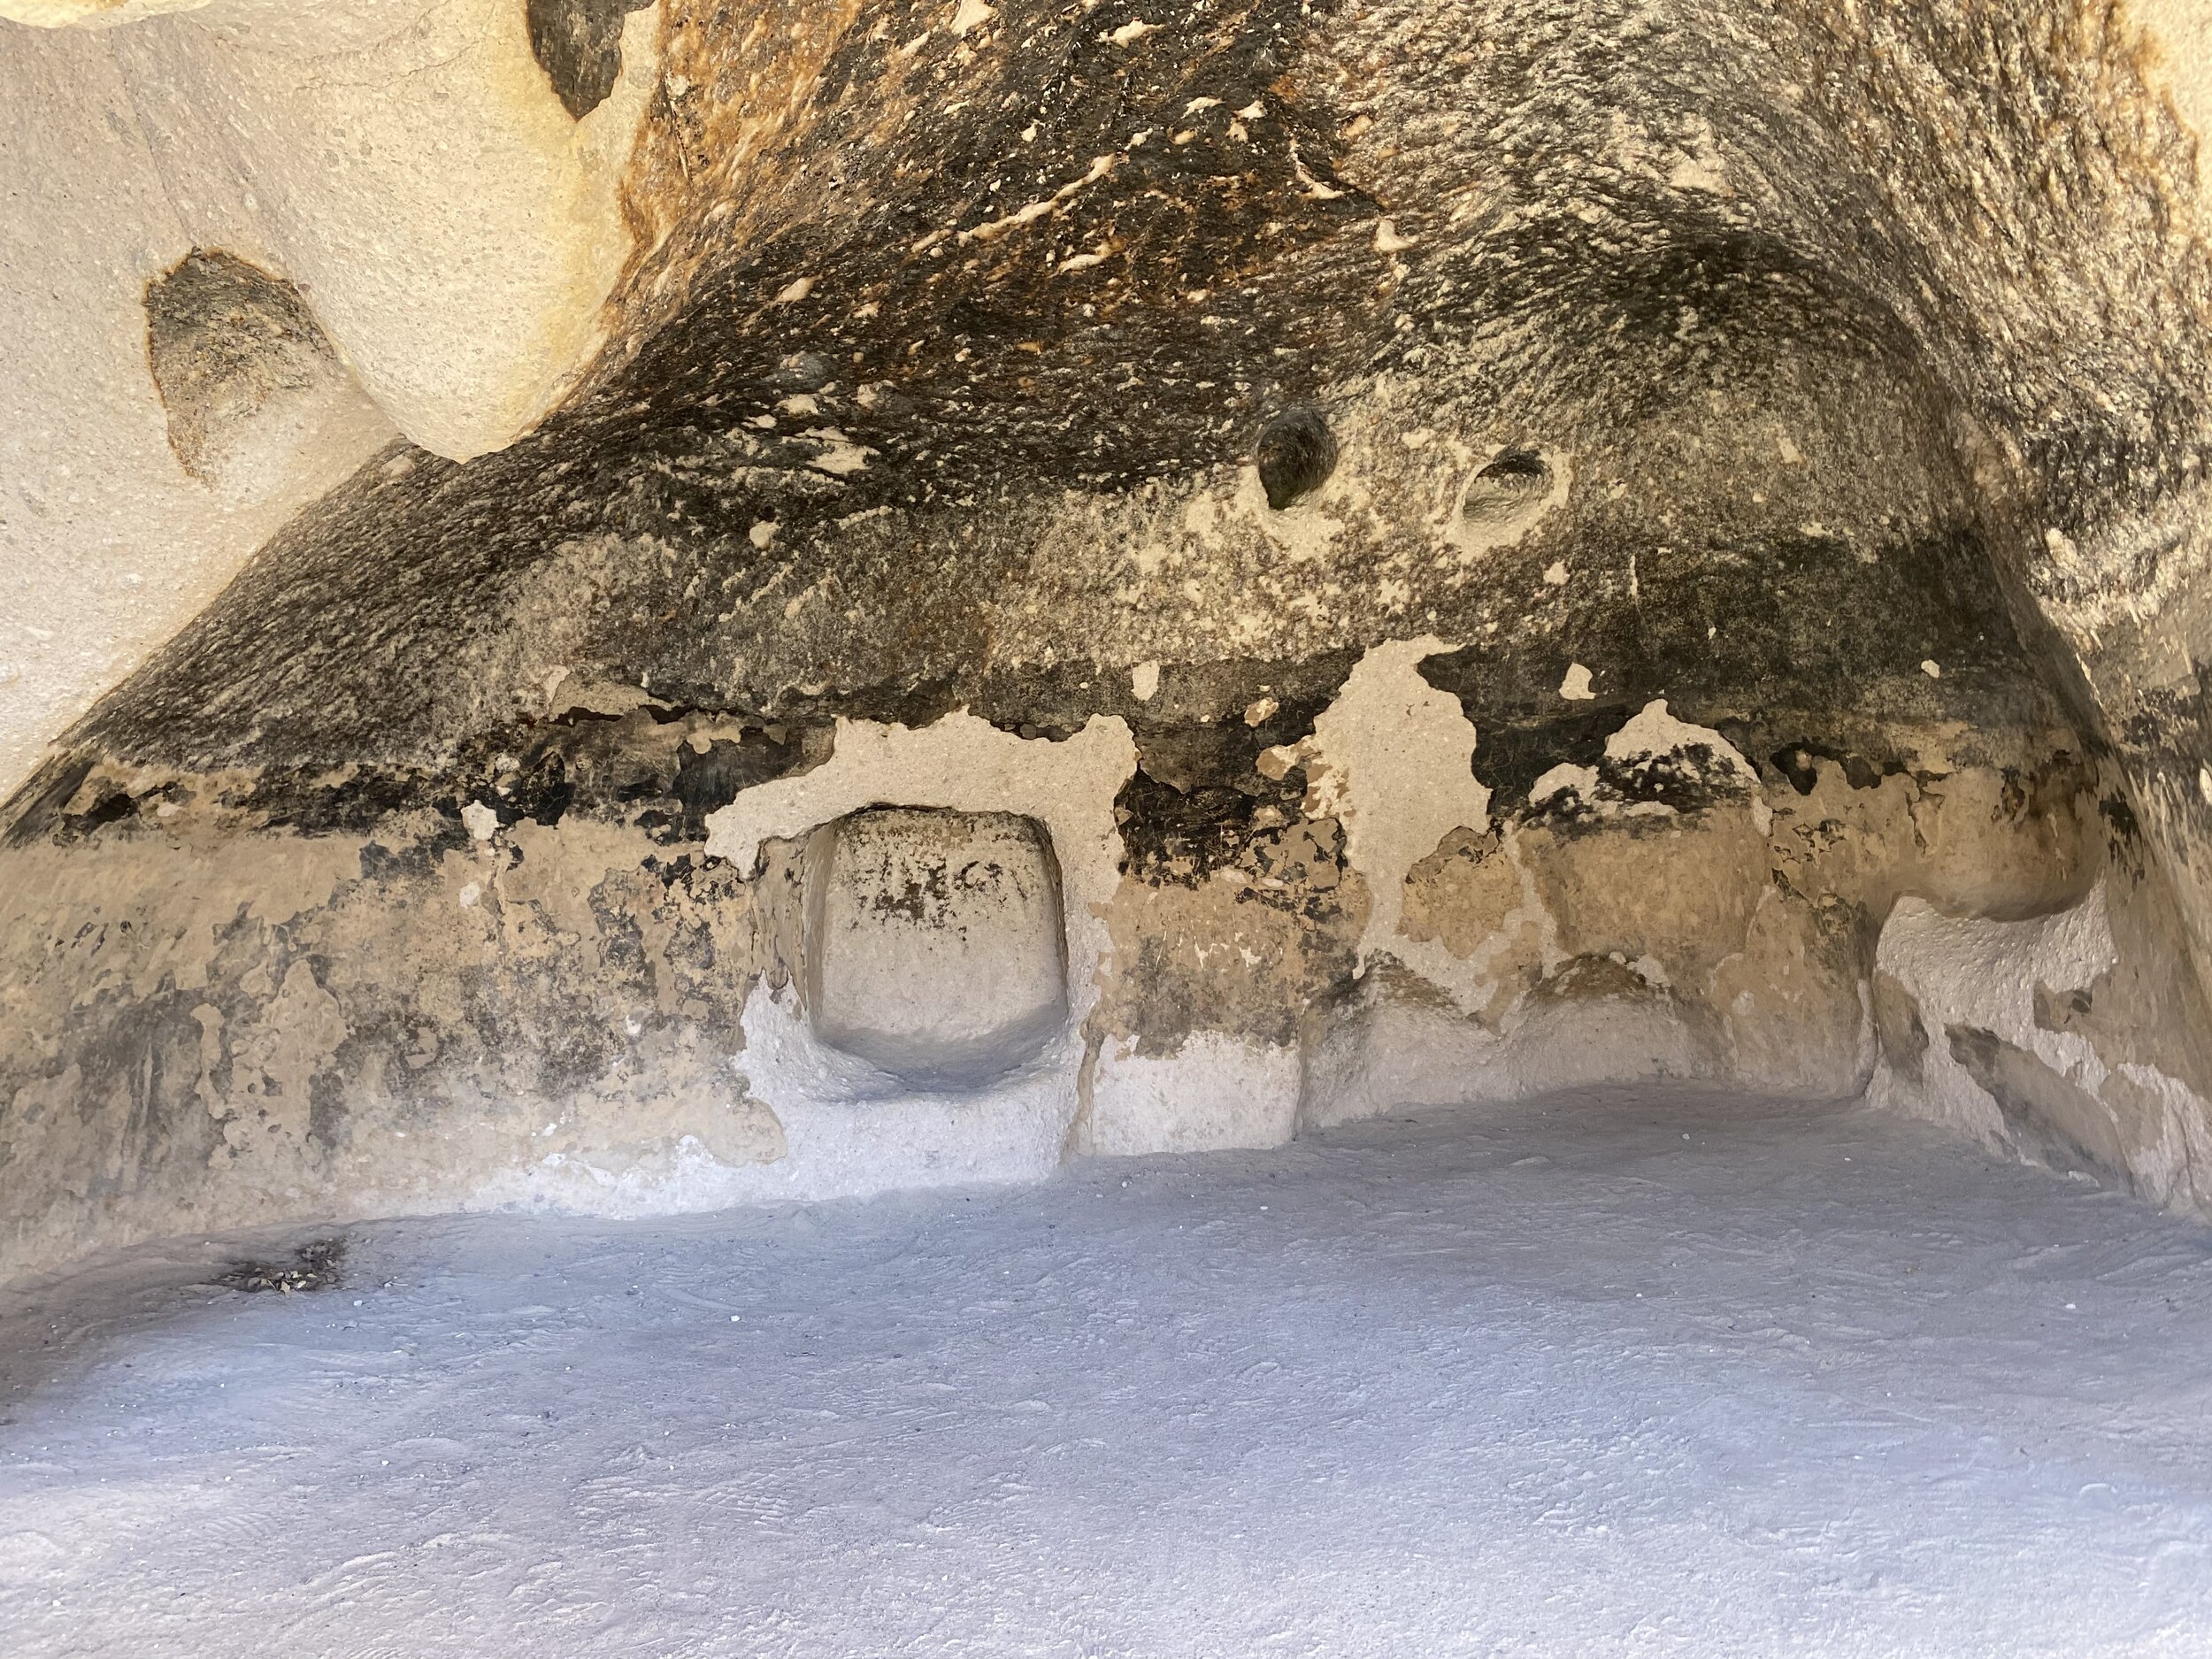 Inside of a cliff dwelling at Bandelier National Monument